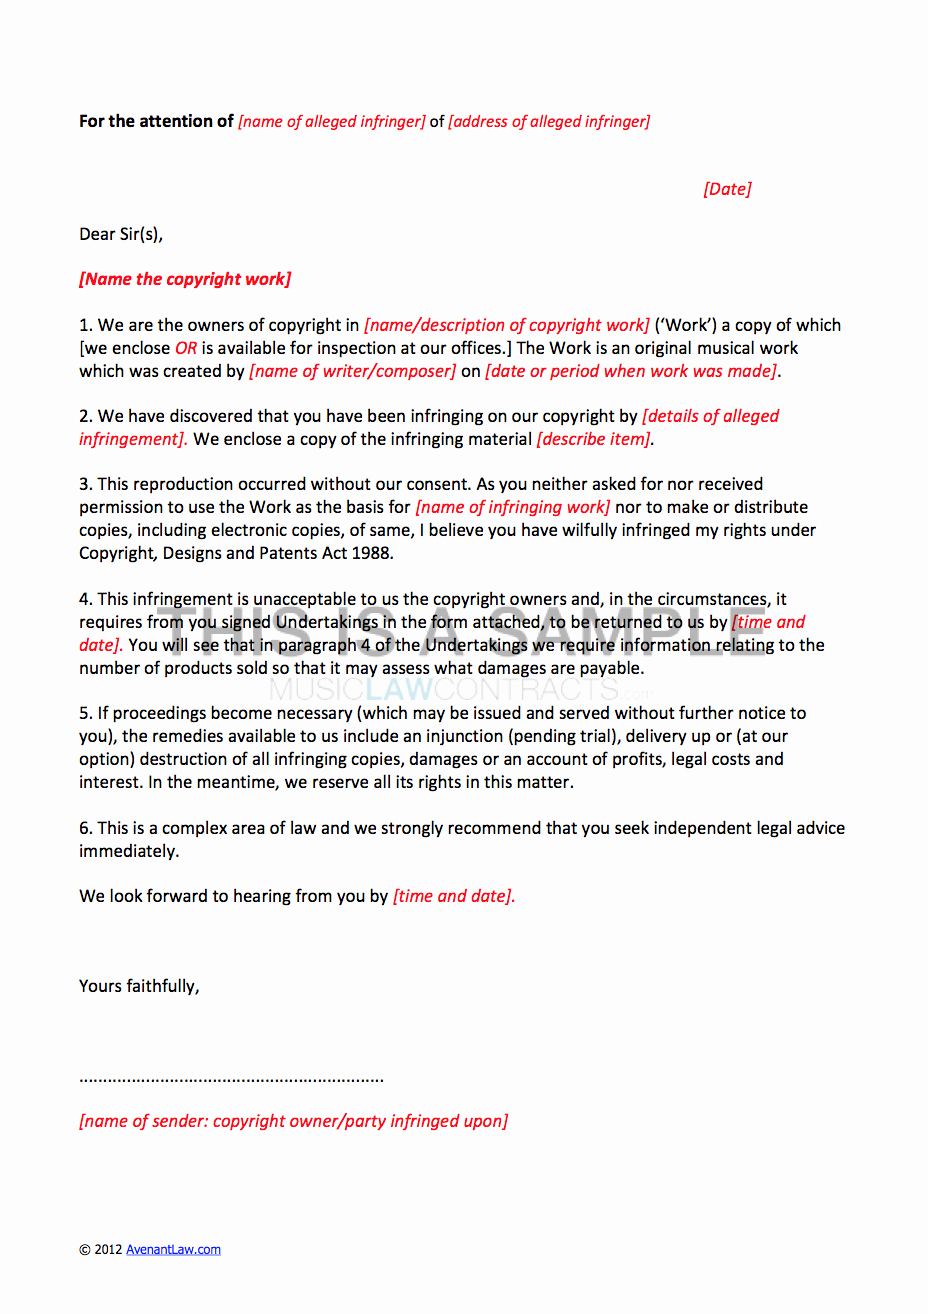 Letter Of Claim Template Copyright Infringement